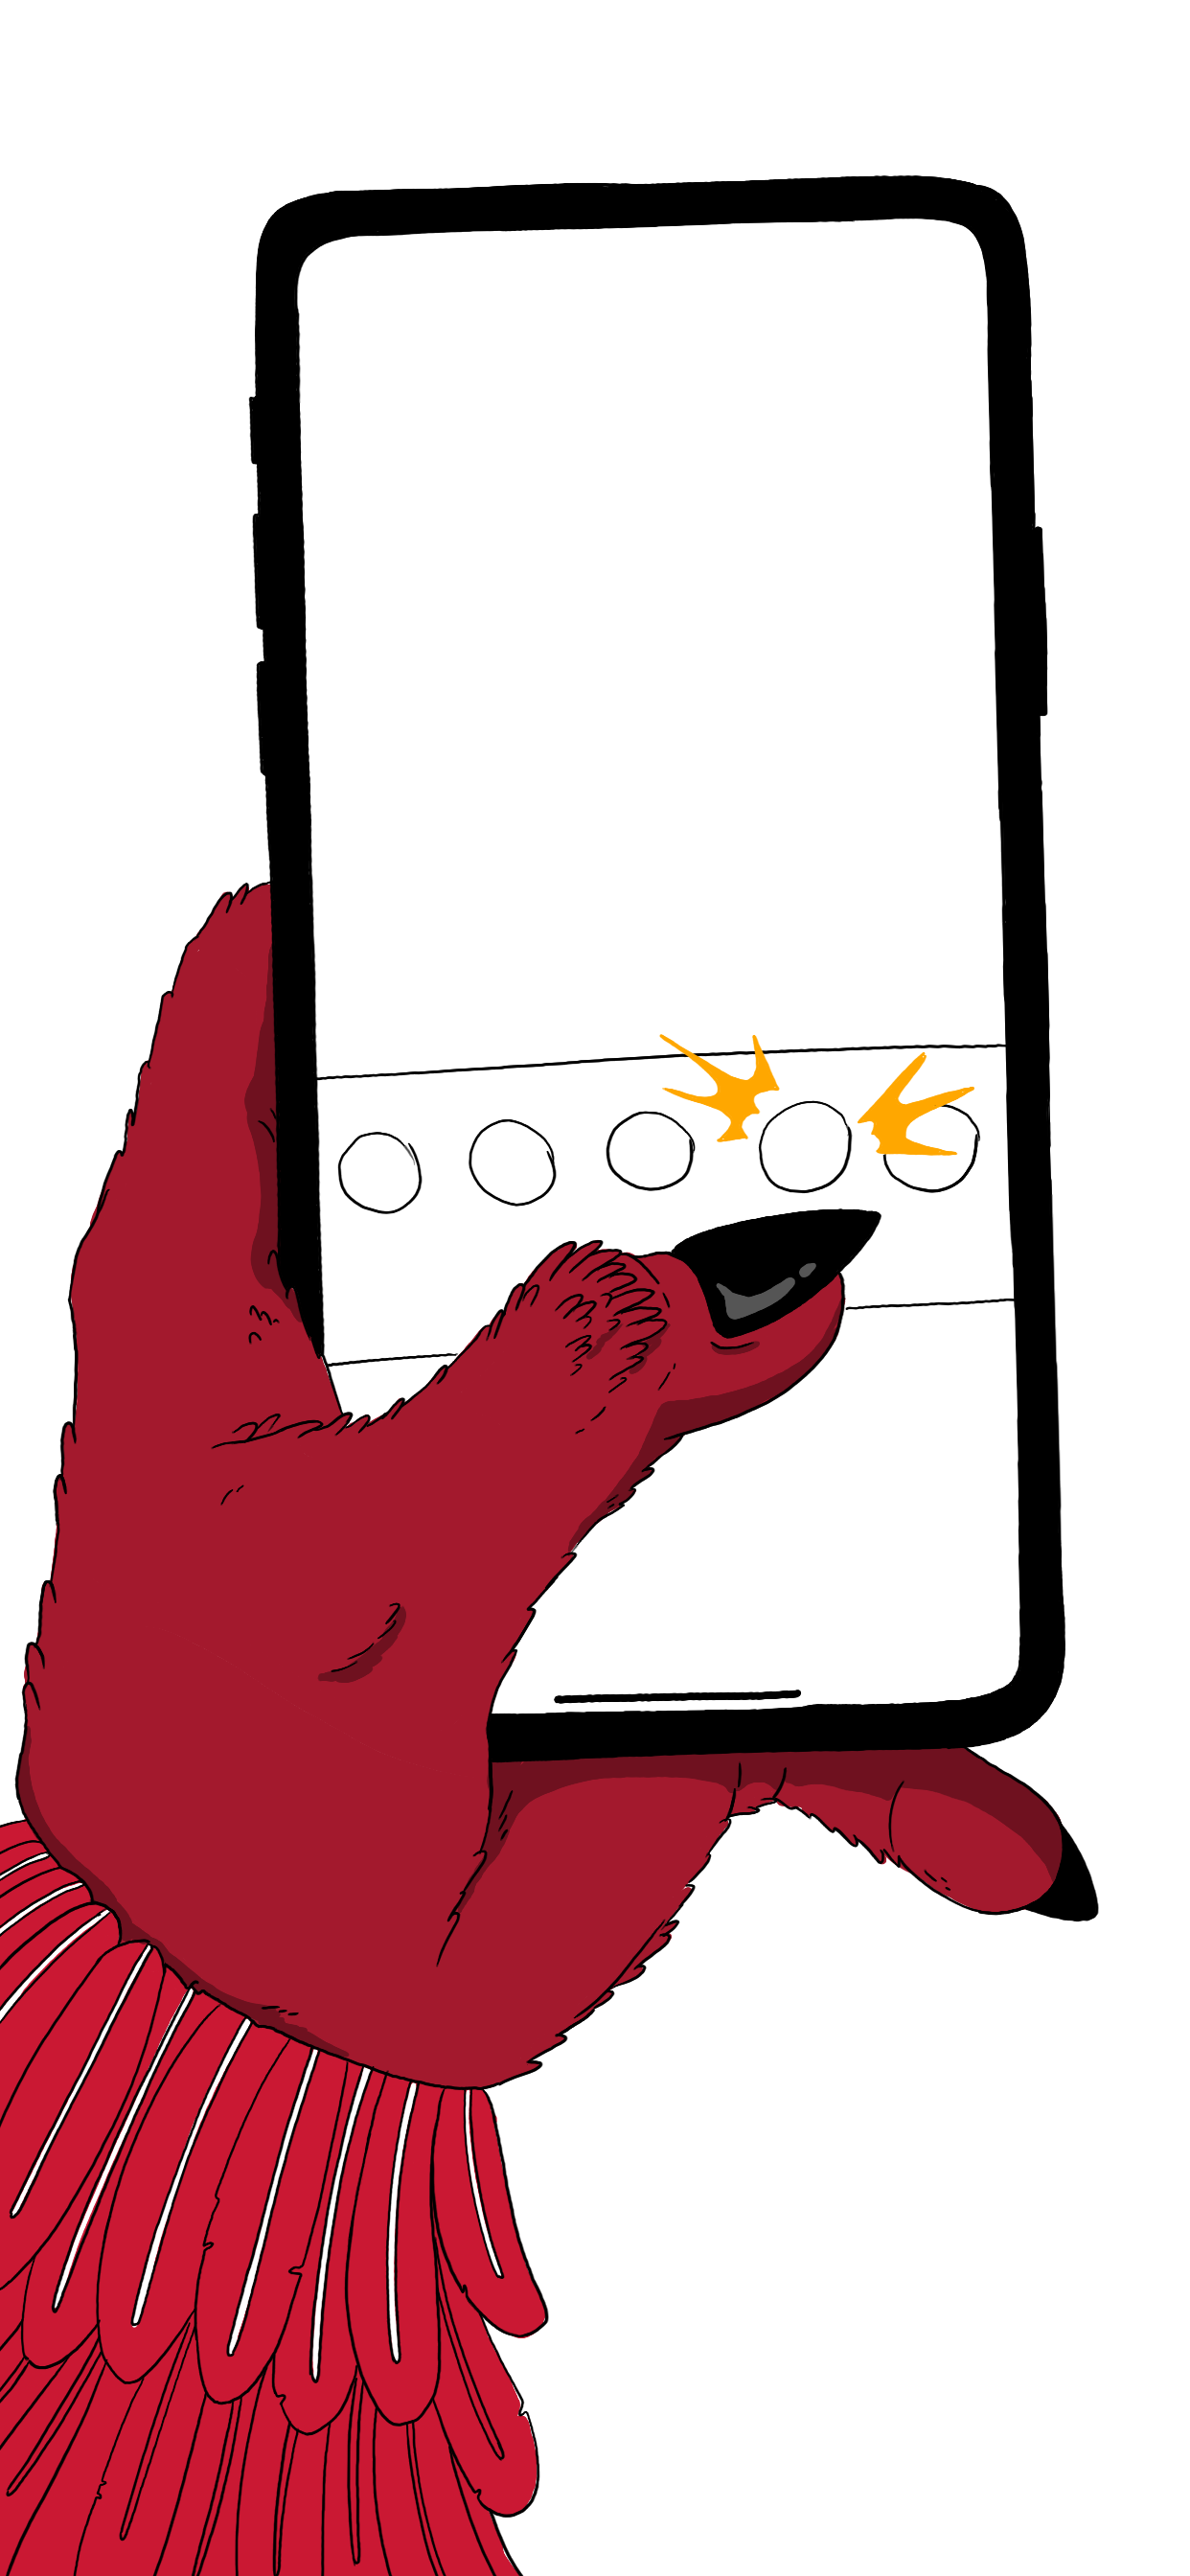 Sports_appstore_roughDrafts_011.png